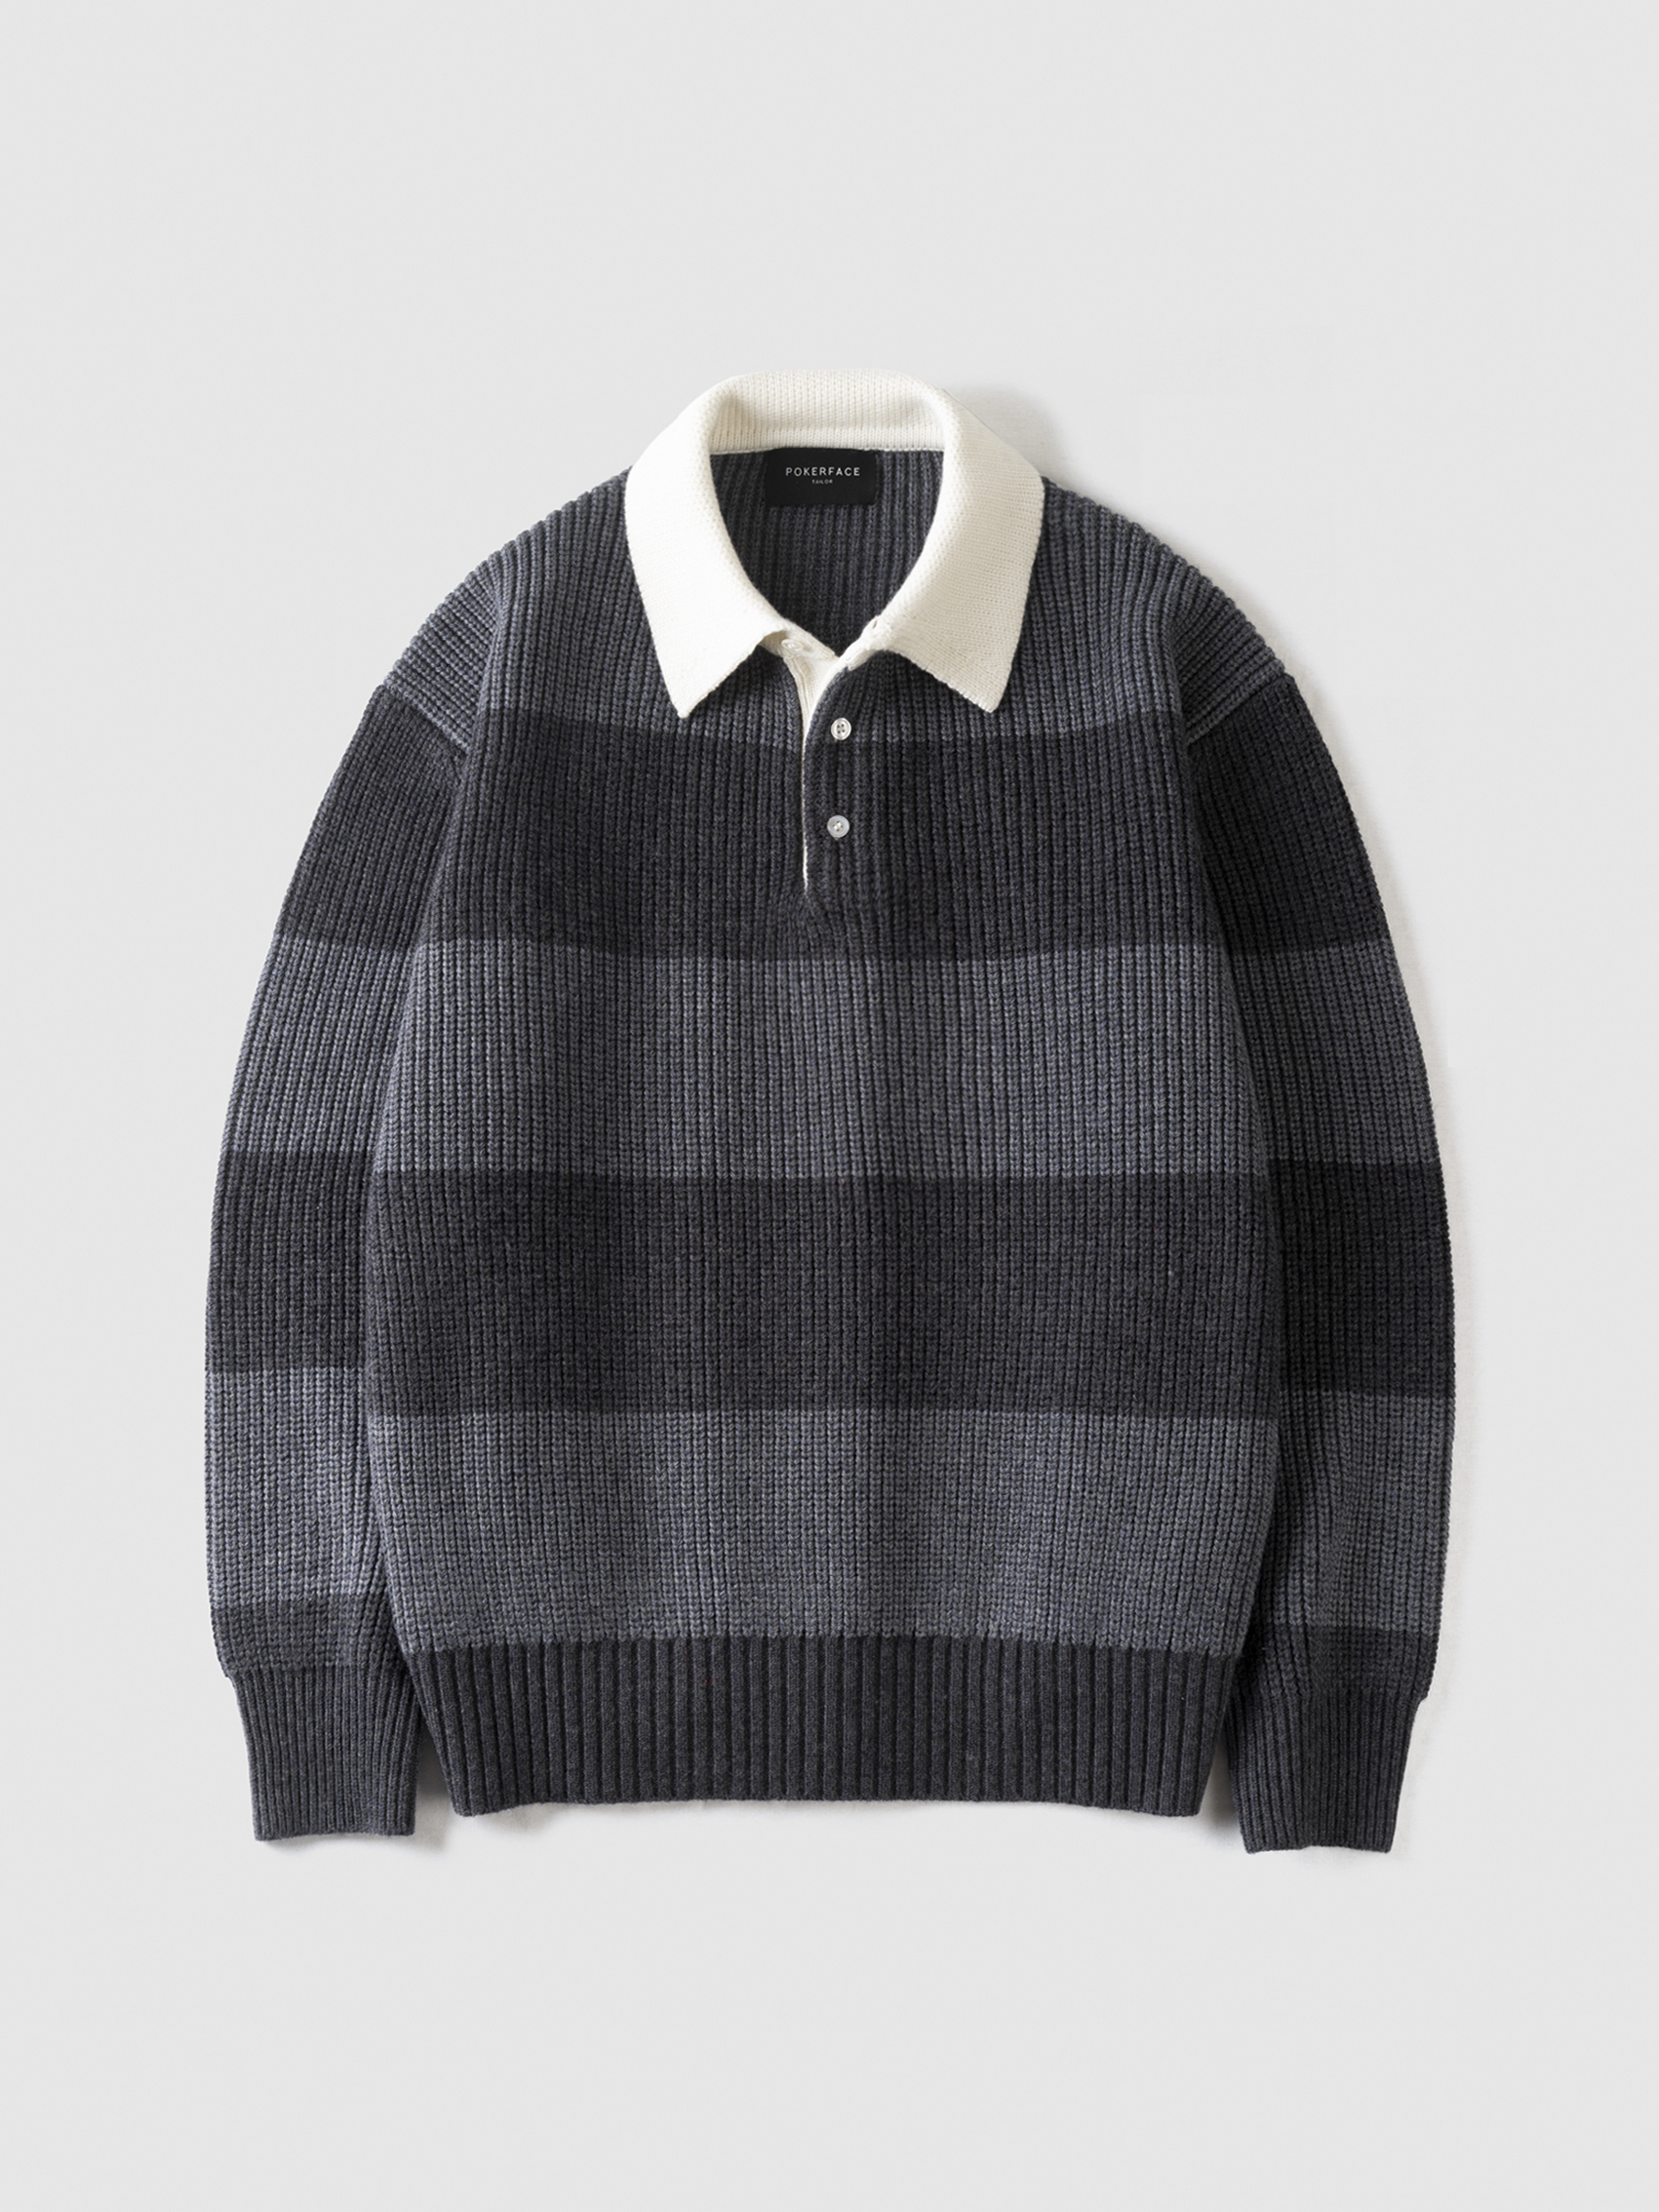 RUGBY SWEATER GREY/CHARCOAL